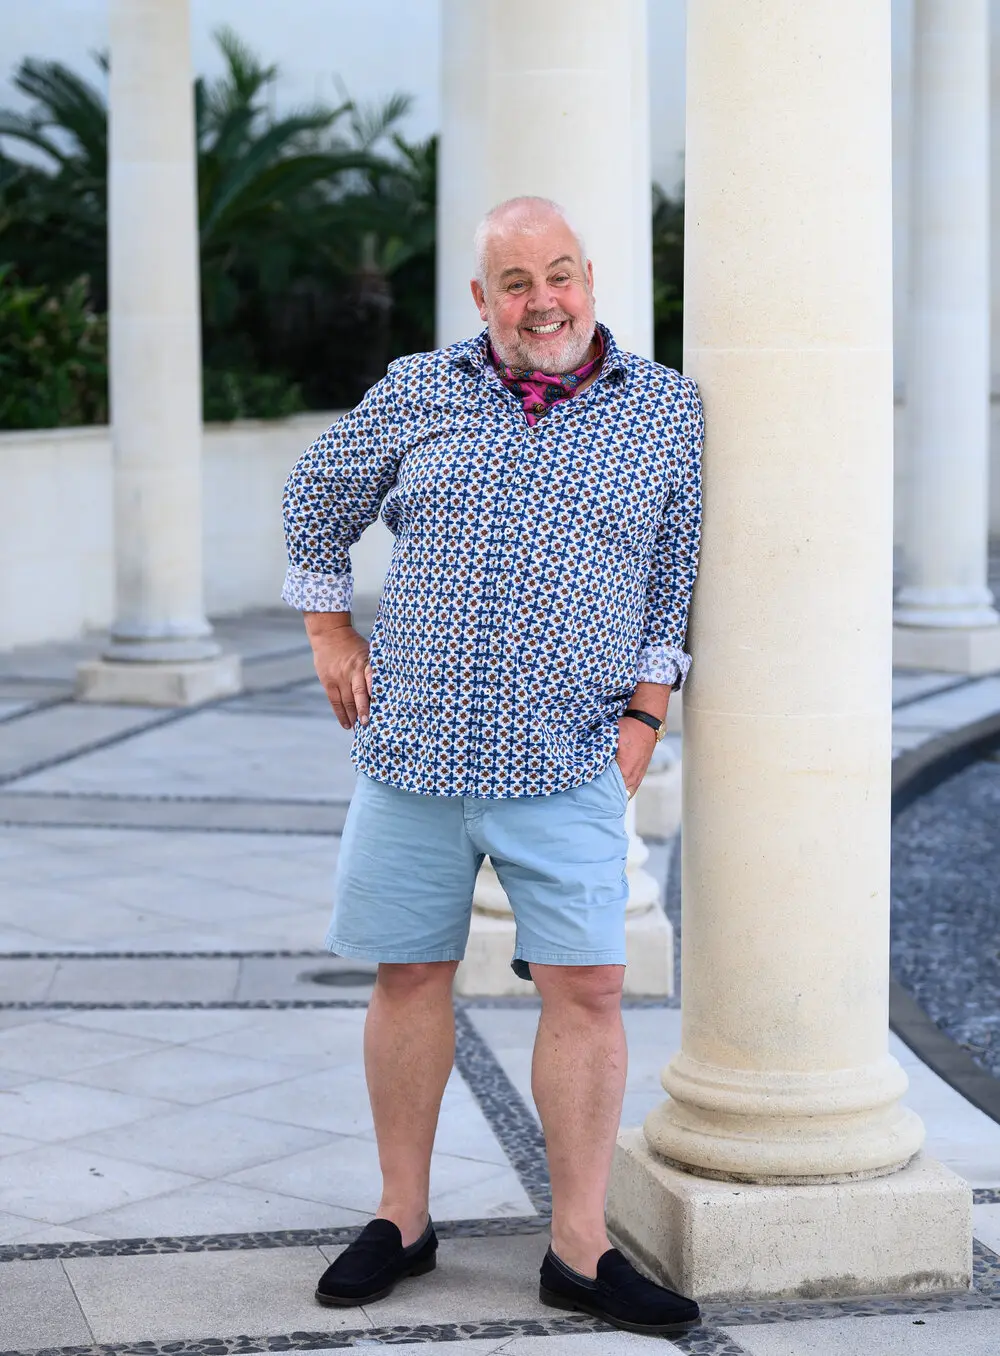 I’m A Celebrity Star Cliff Parisi Leading The Call For People To’ Walk Home For Christmas